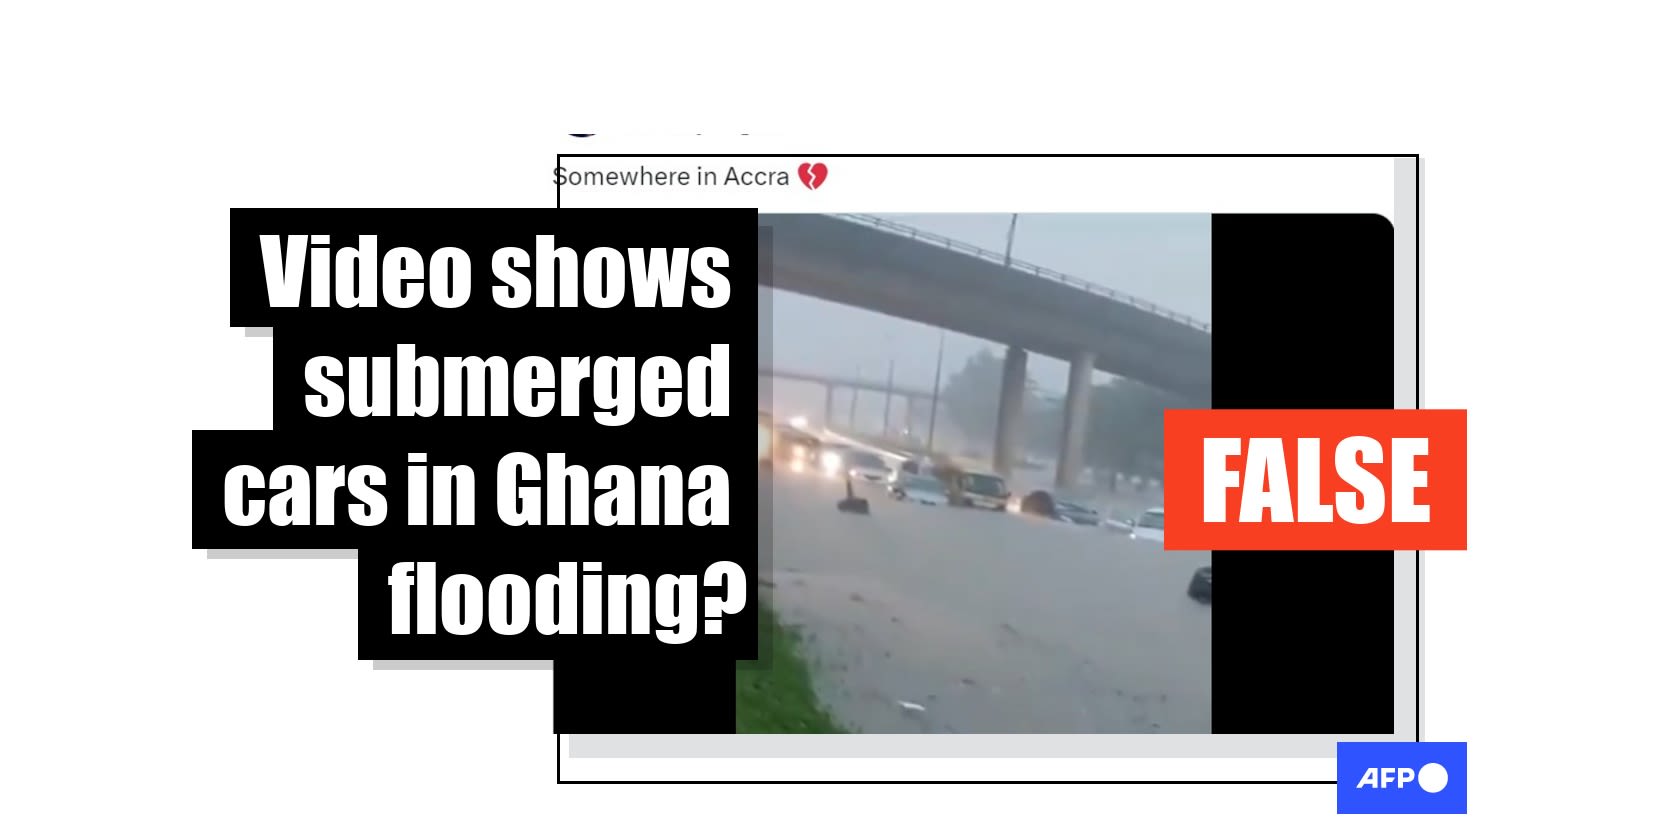 Clip showing a flooded road was filmed in Nigeria, not Ghana